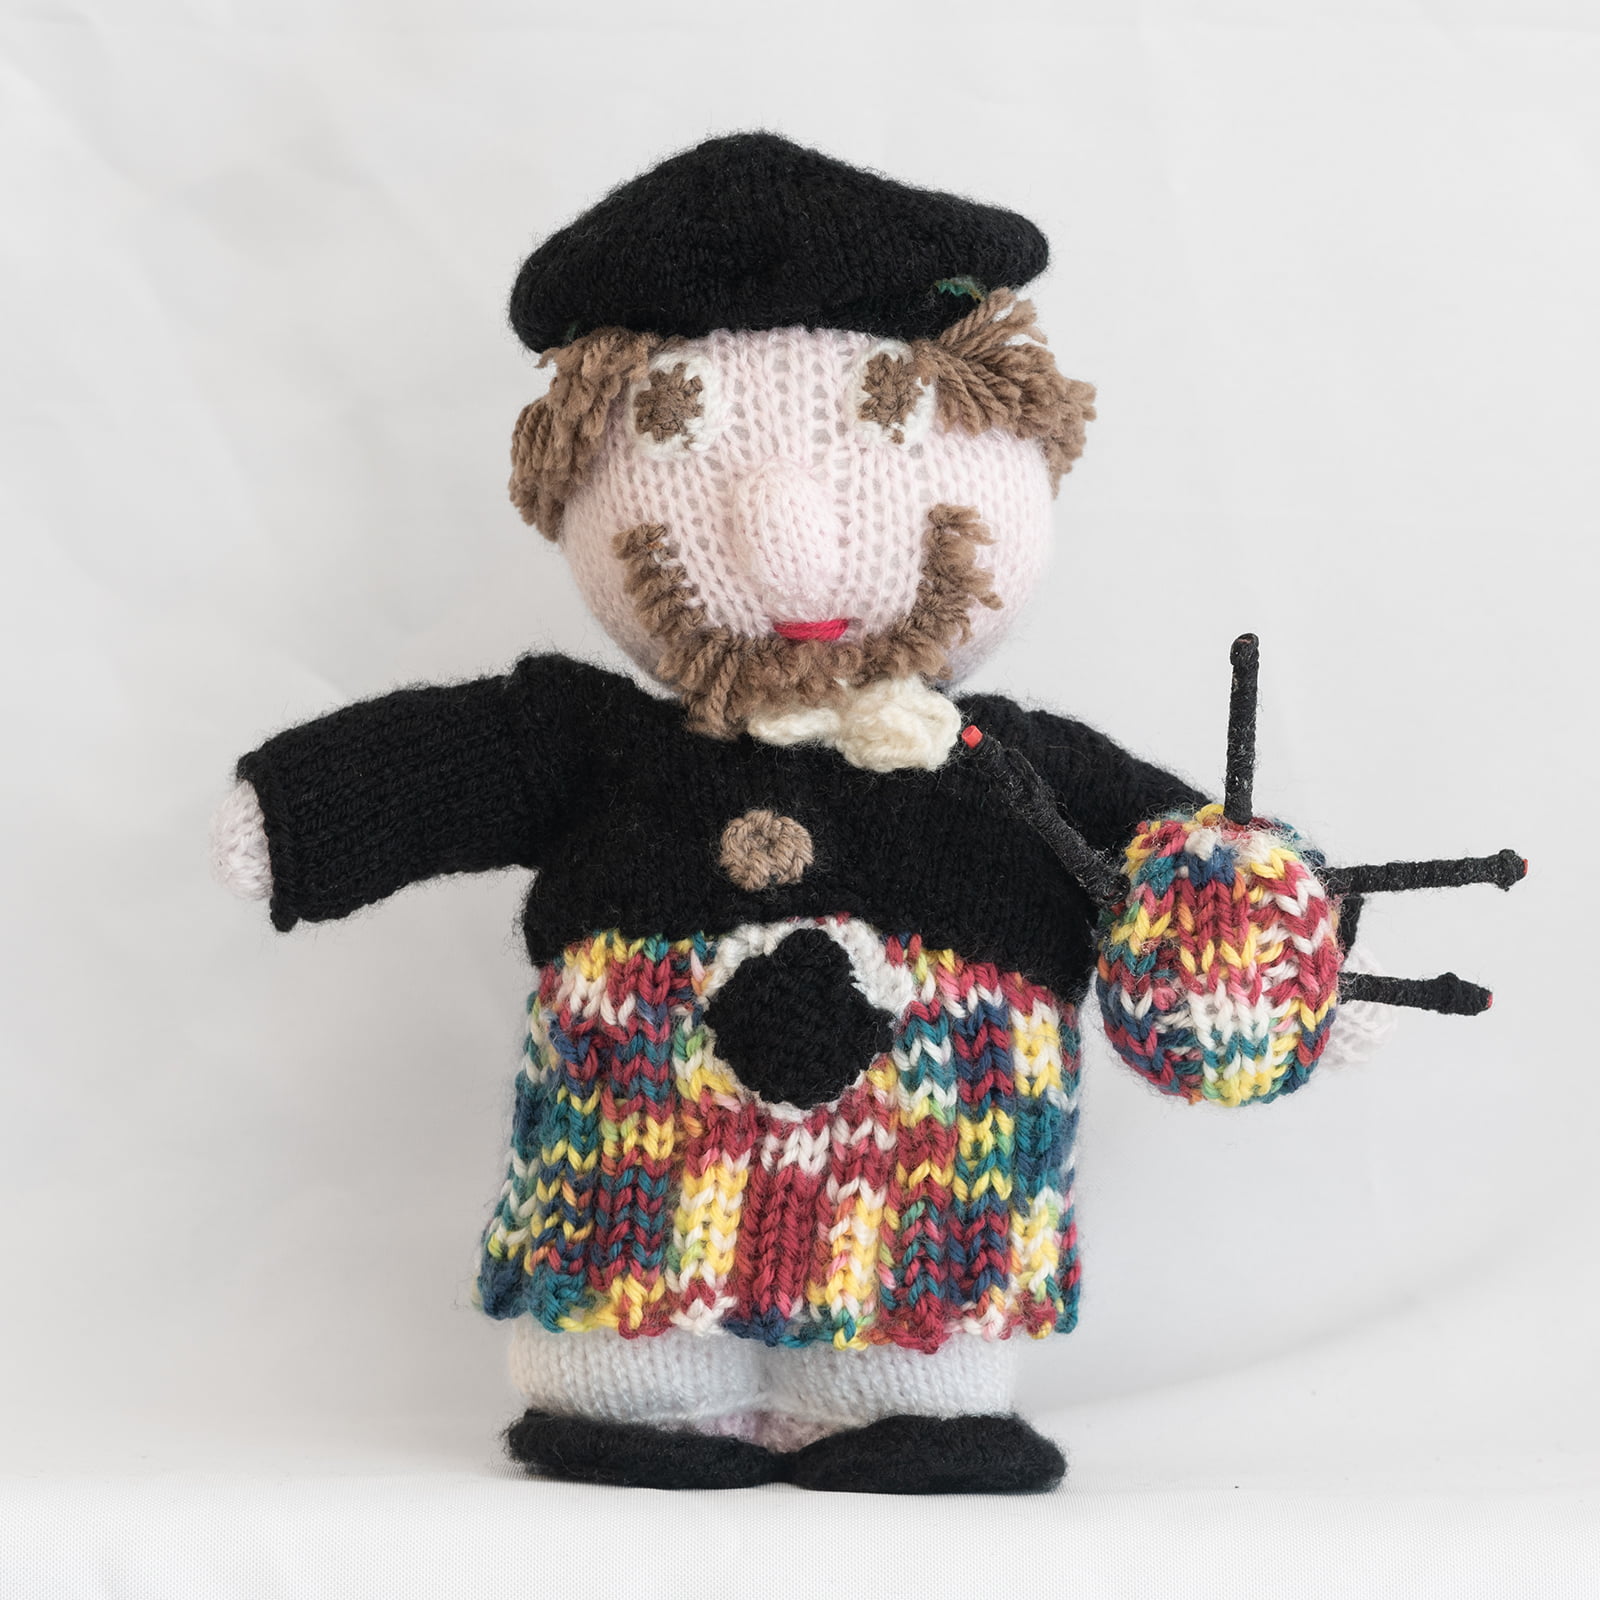 Hand knitted Scottish piper